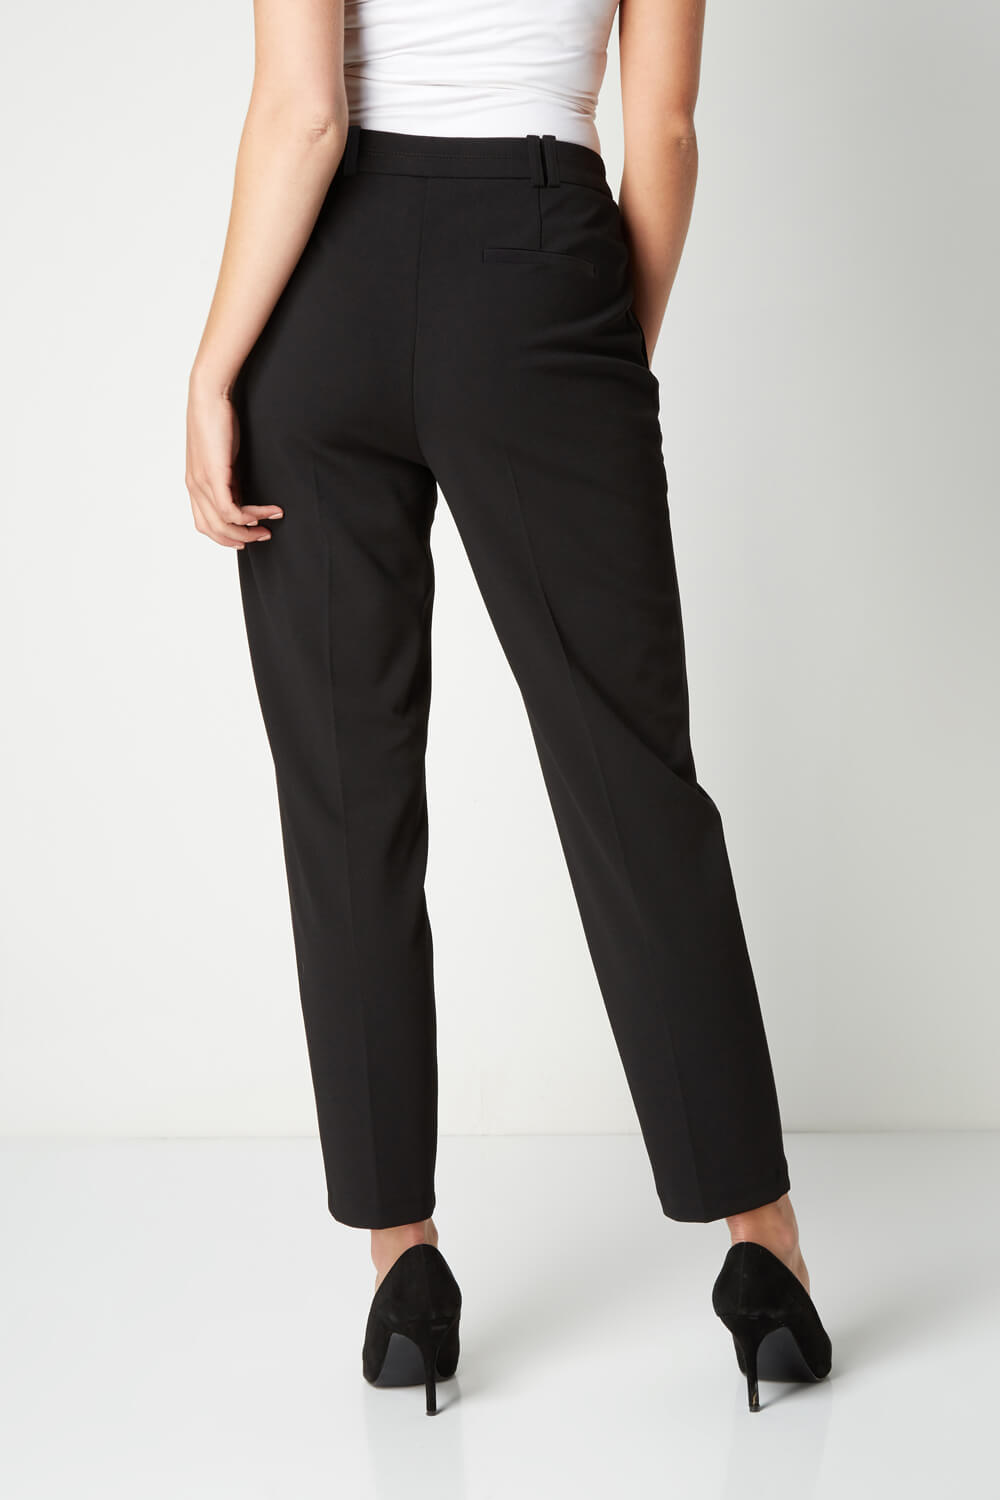 How High Can High-Waisted Pants Go? | The New Yorker